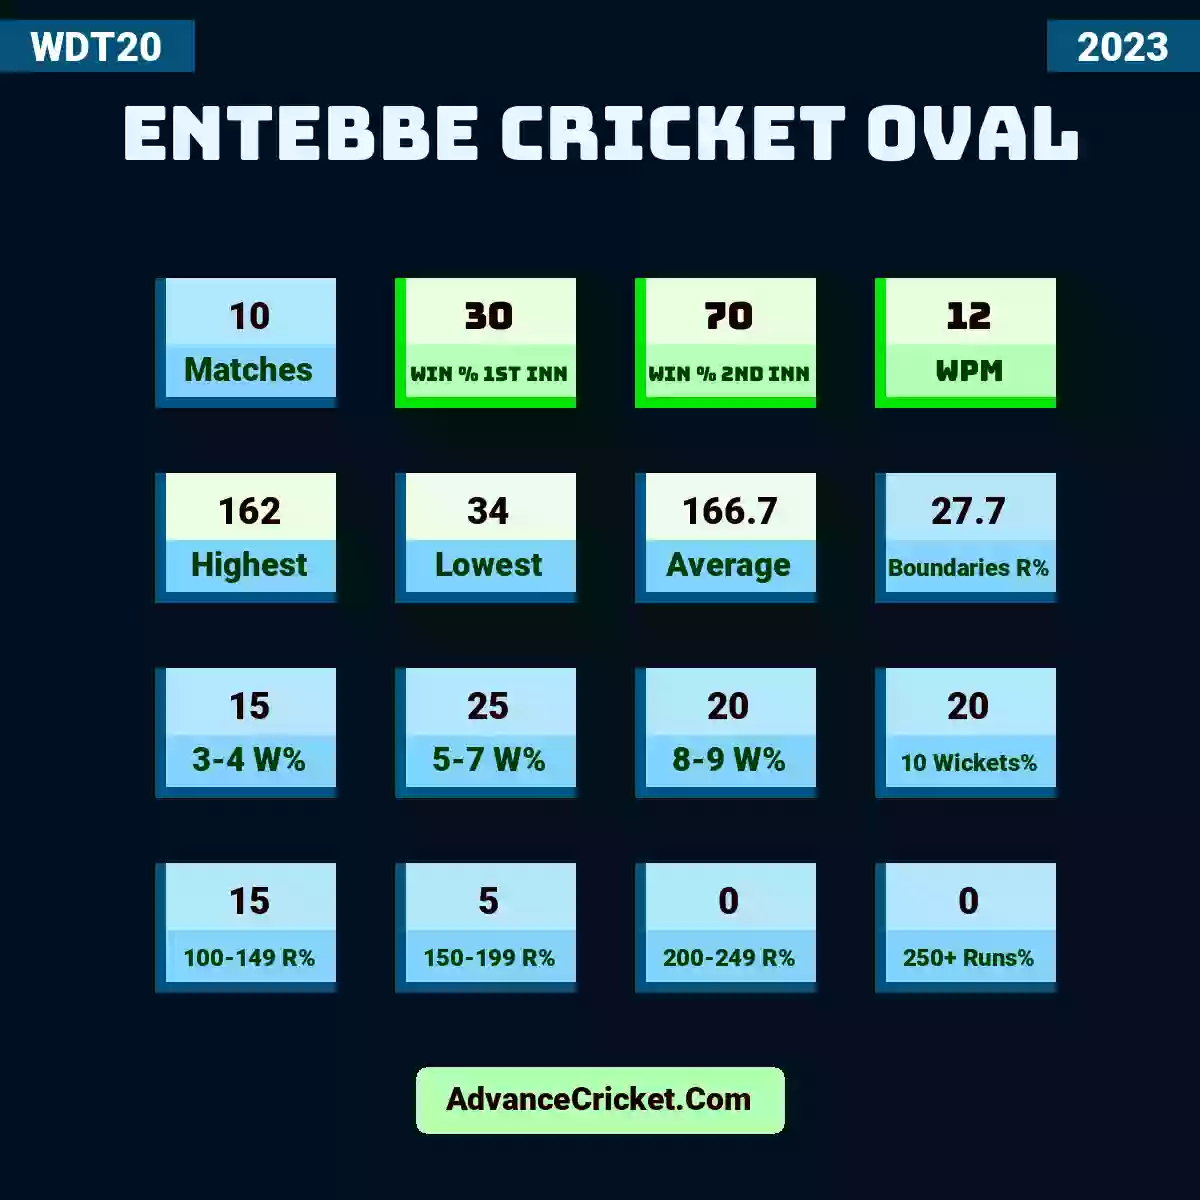 Image showing Entebbe Cricket Oval with Matches: 10, Win % 1st Inn: 30, Win % 2nd Inn: 70, WPM: 12, Highest: 162, Lowest: 34, Average: 166.7, Boundaries R%: 27.7, 3-4 W%: 15, 5-7 W%: 25, 8-9 W%: 20, 10 Wickets%: 20, 100-149 R%: 15, 150-199 R%: 5, 200-249 R%: 0, 250+ Runs%: 0.